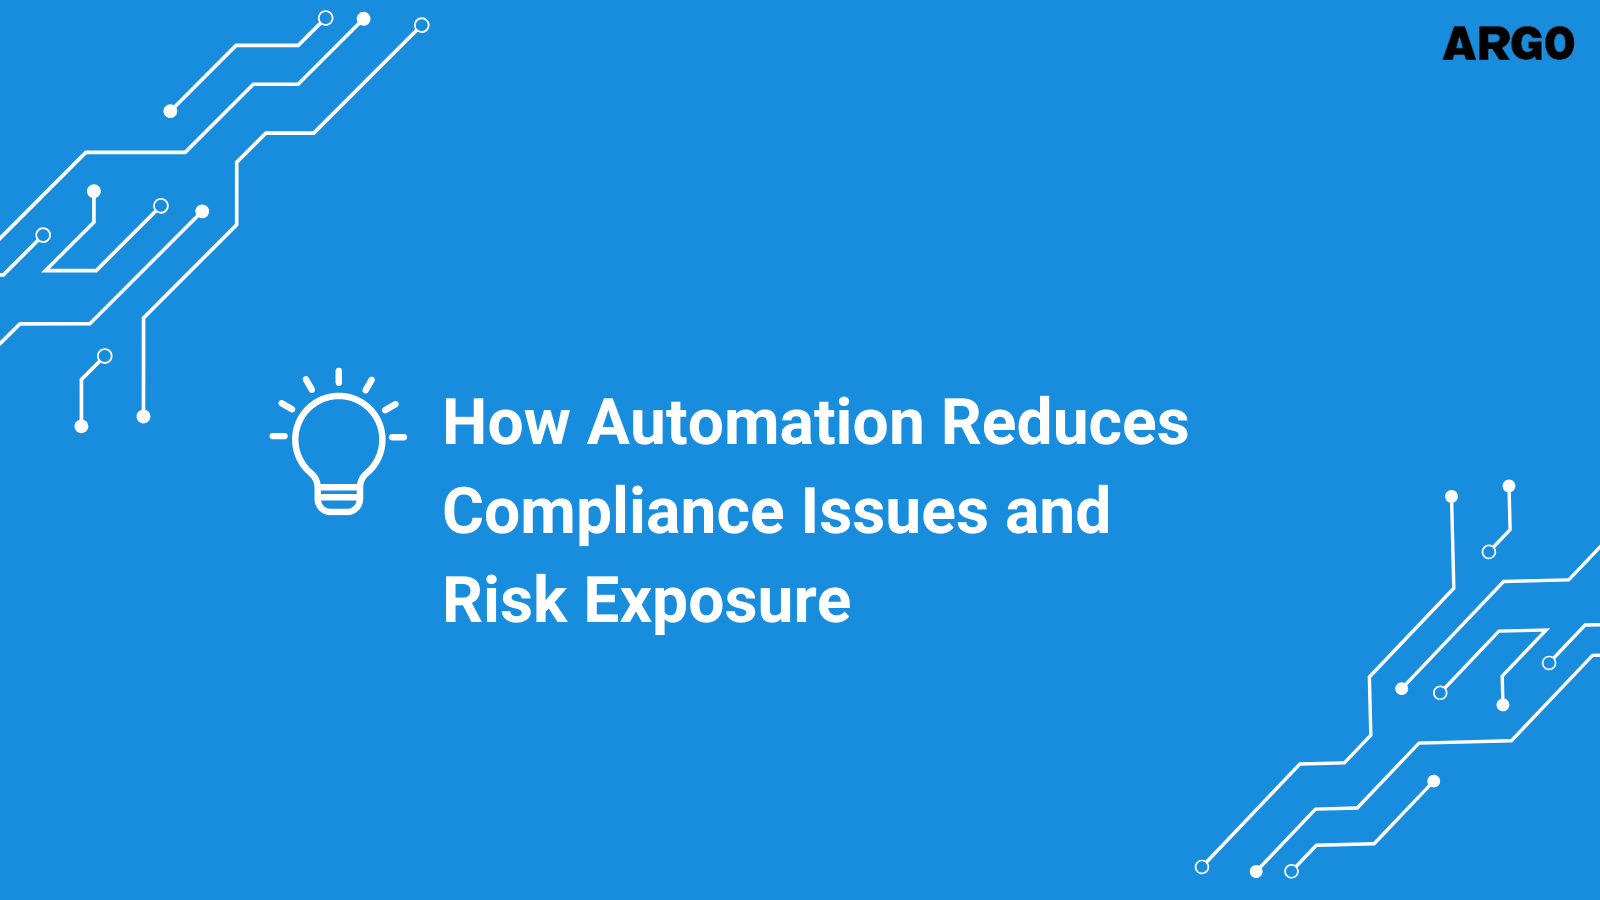 How Automation Reduces Compliance Issues and Risk Exposure